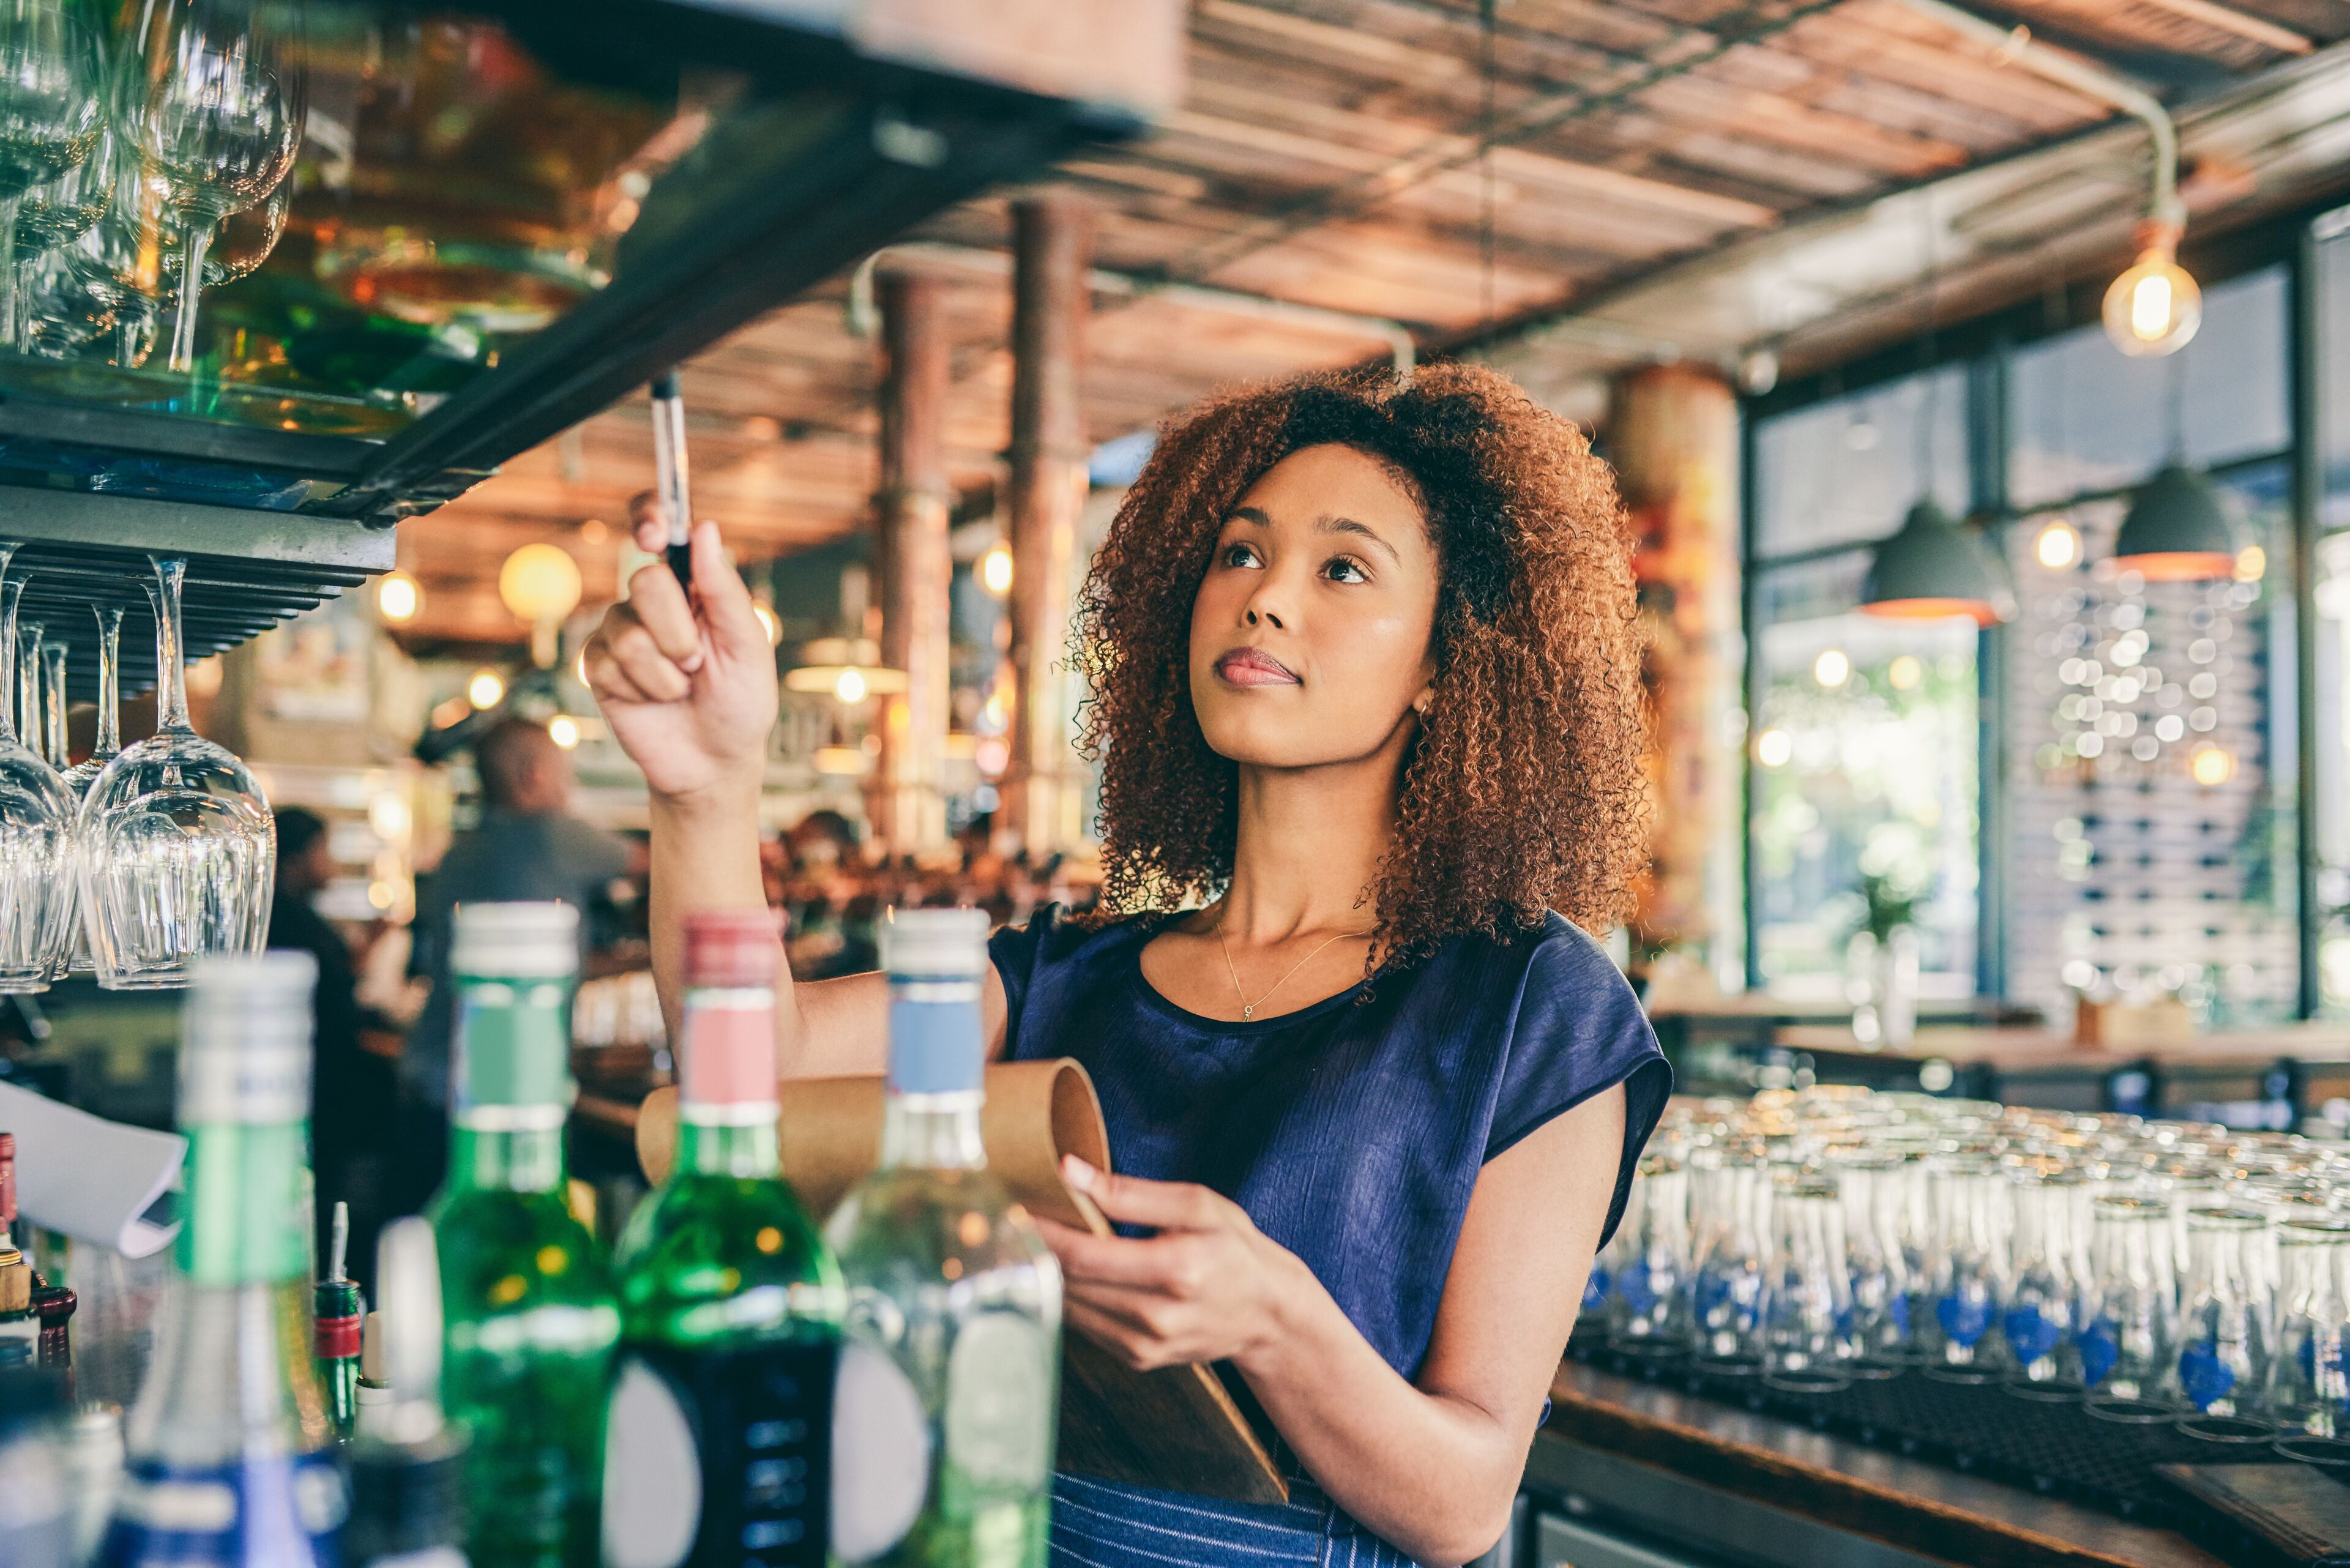 A thoughtful female bartender with curly hair is poised to take a customer's order in a bustling bar.